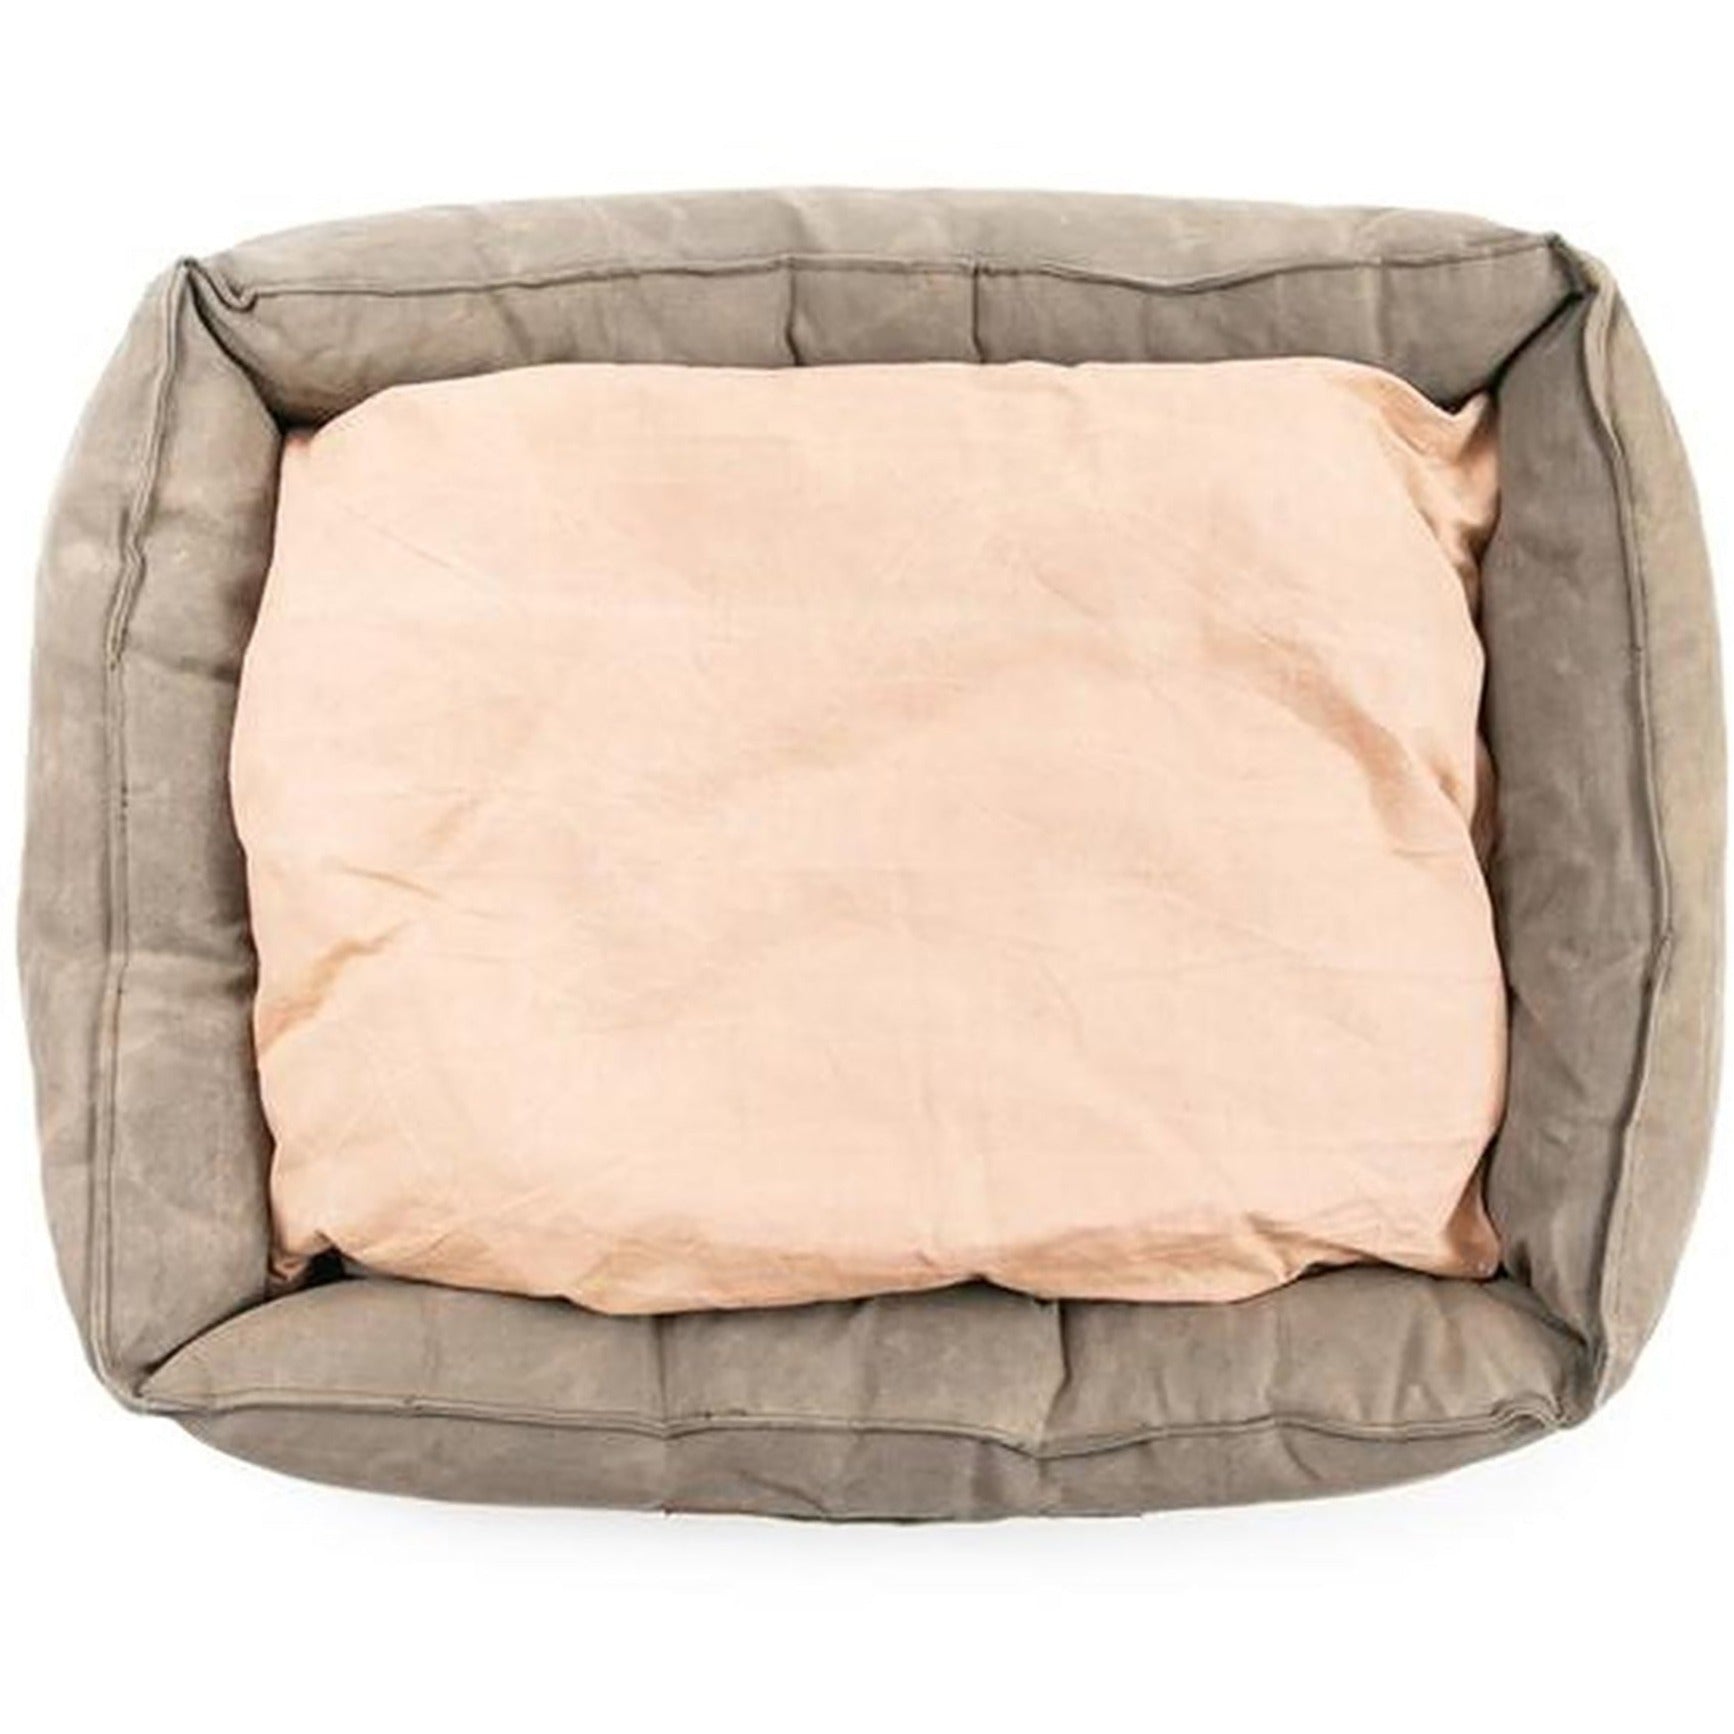 XOXO Washed Canvas Pet Bed